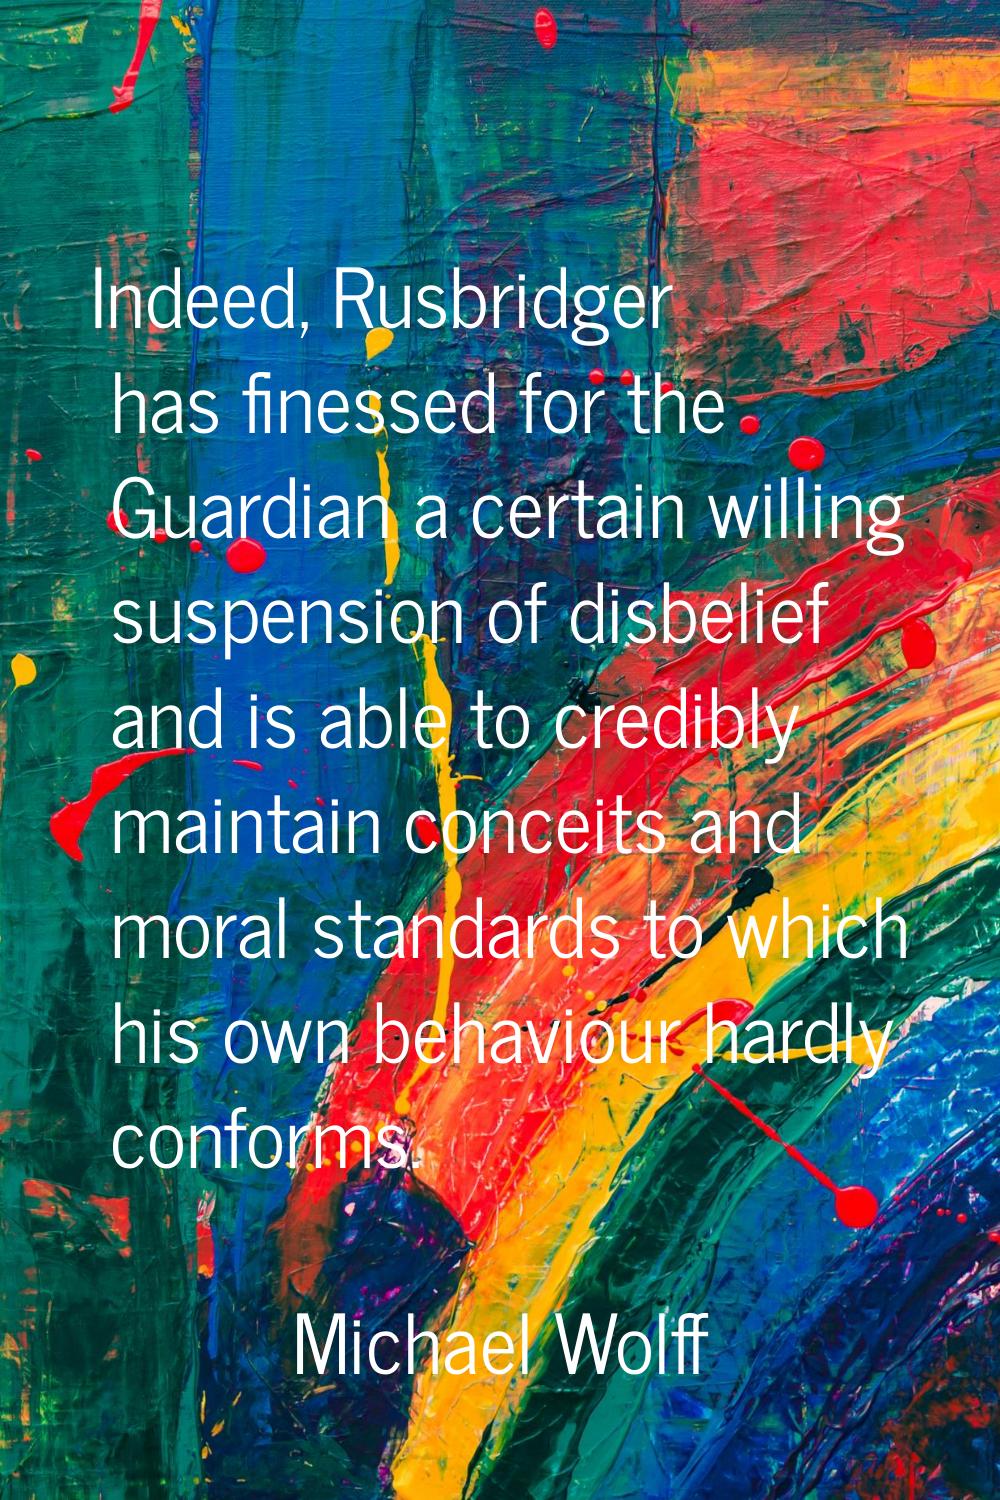 Indeed, Rusbridger has finessed for the Guardian a certain willing suspension of disbelief and is a